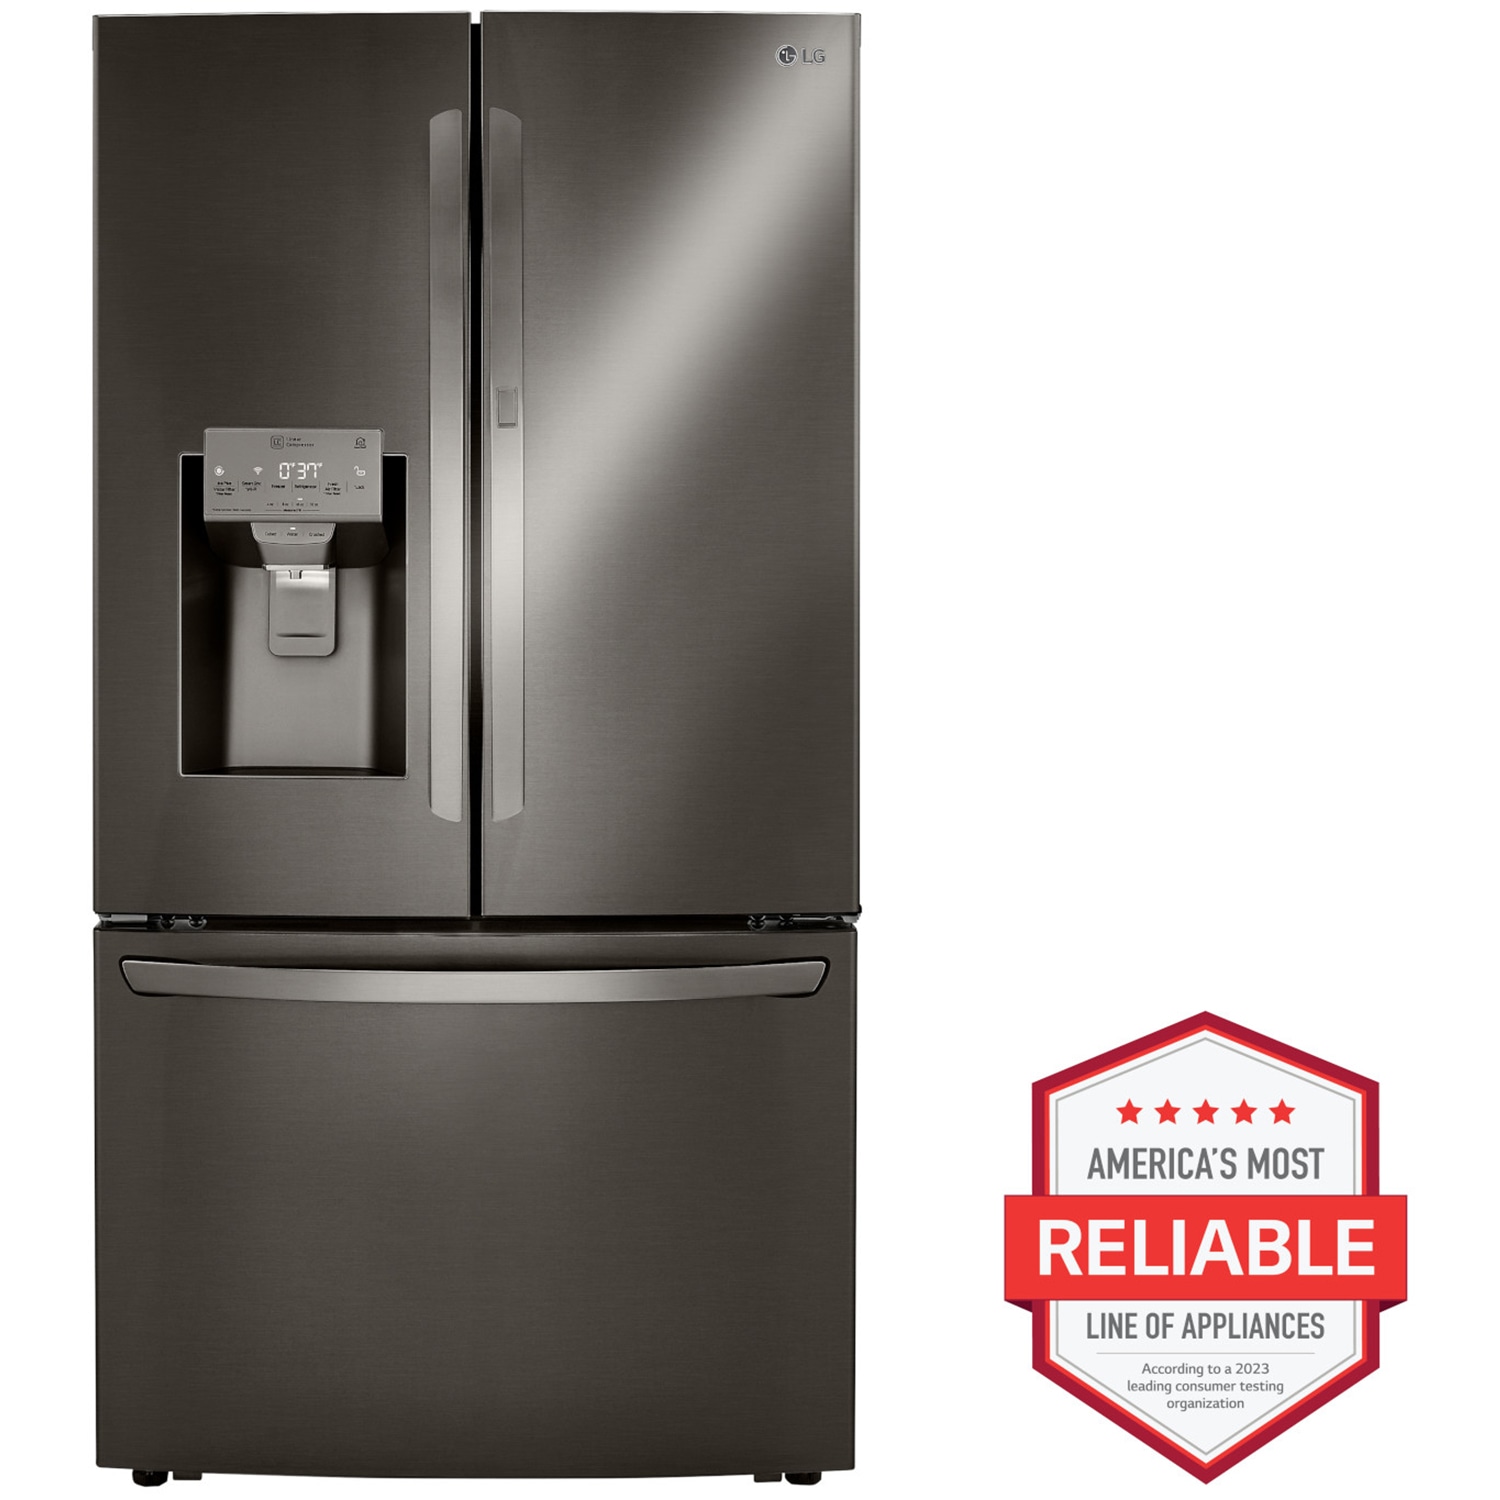 LG 36" 29.7 Cu. Ft. Smart French Door Refrigerator with Ice & Water Dispenser - Black Stainless Steel (LRFDS3016D)